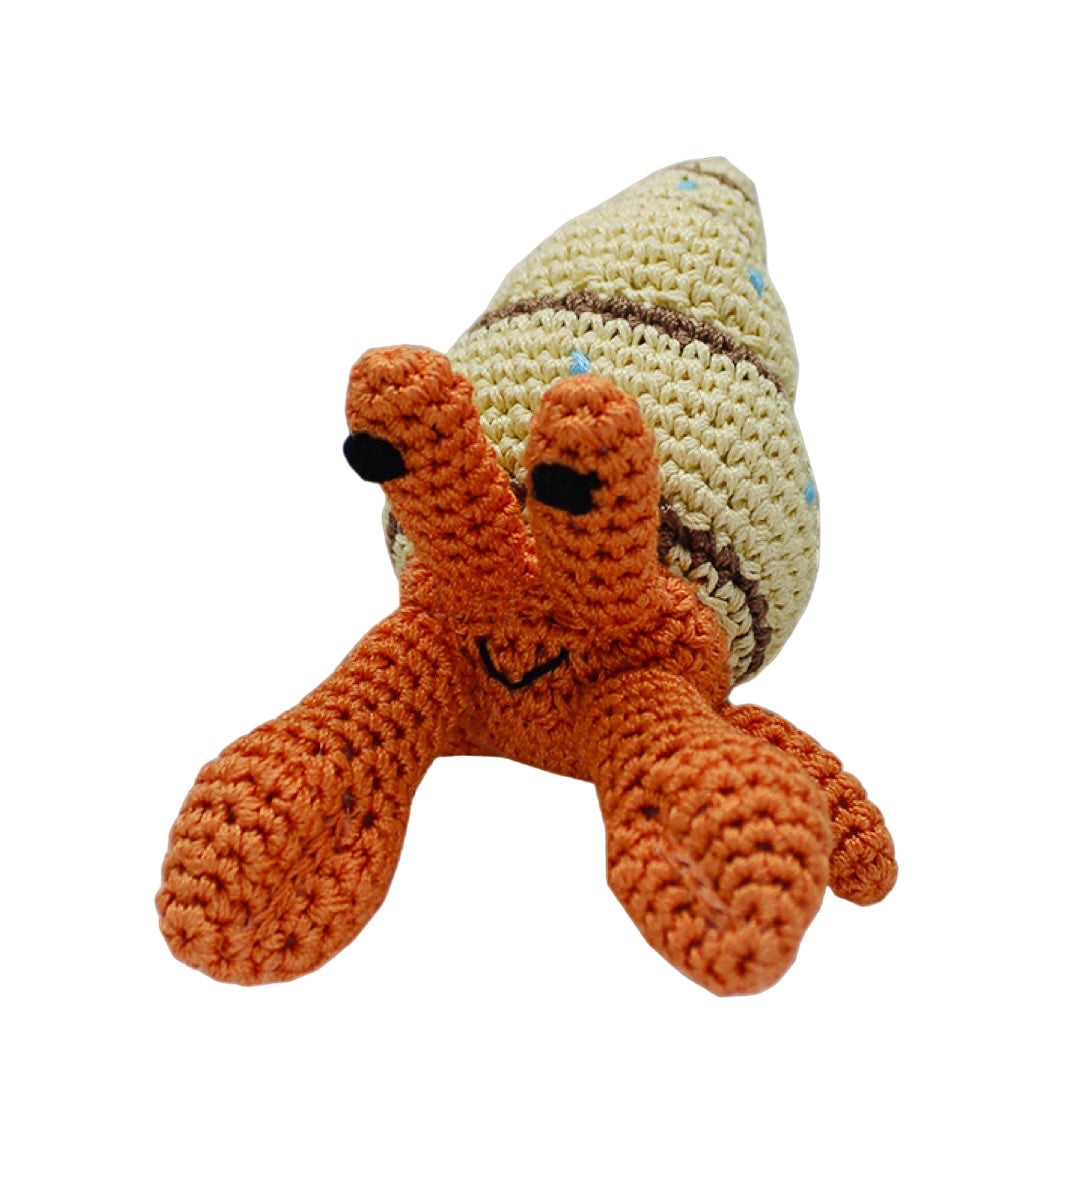 Knit Knacks &quot;Shelly the Hermit Crab&quot; handmade organic cotton dog toy. Smiling orange crab with pinchers in a tan shell.